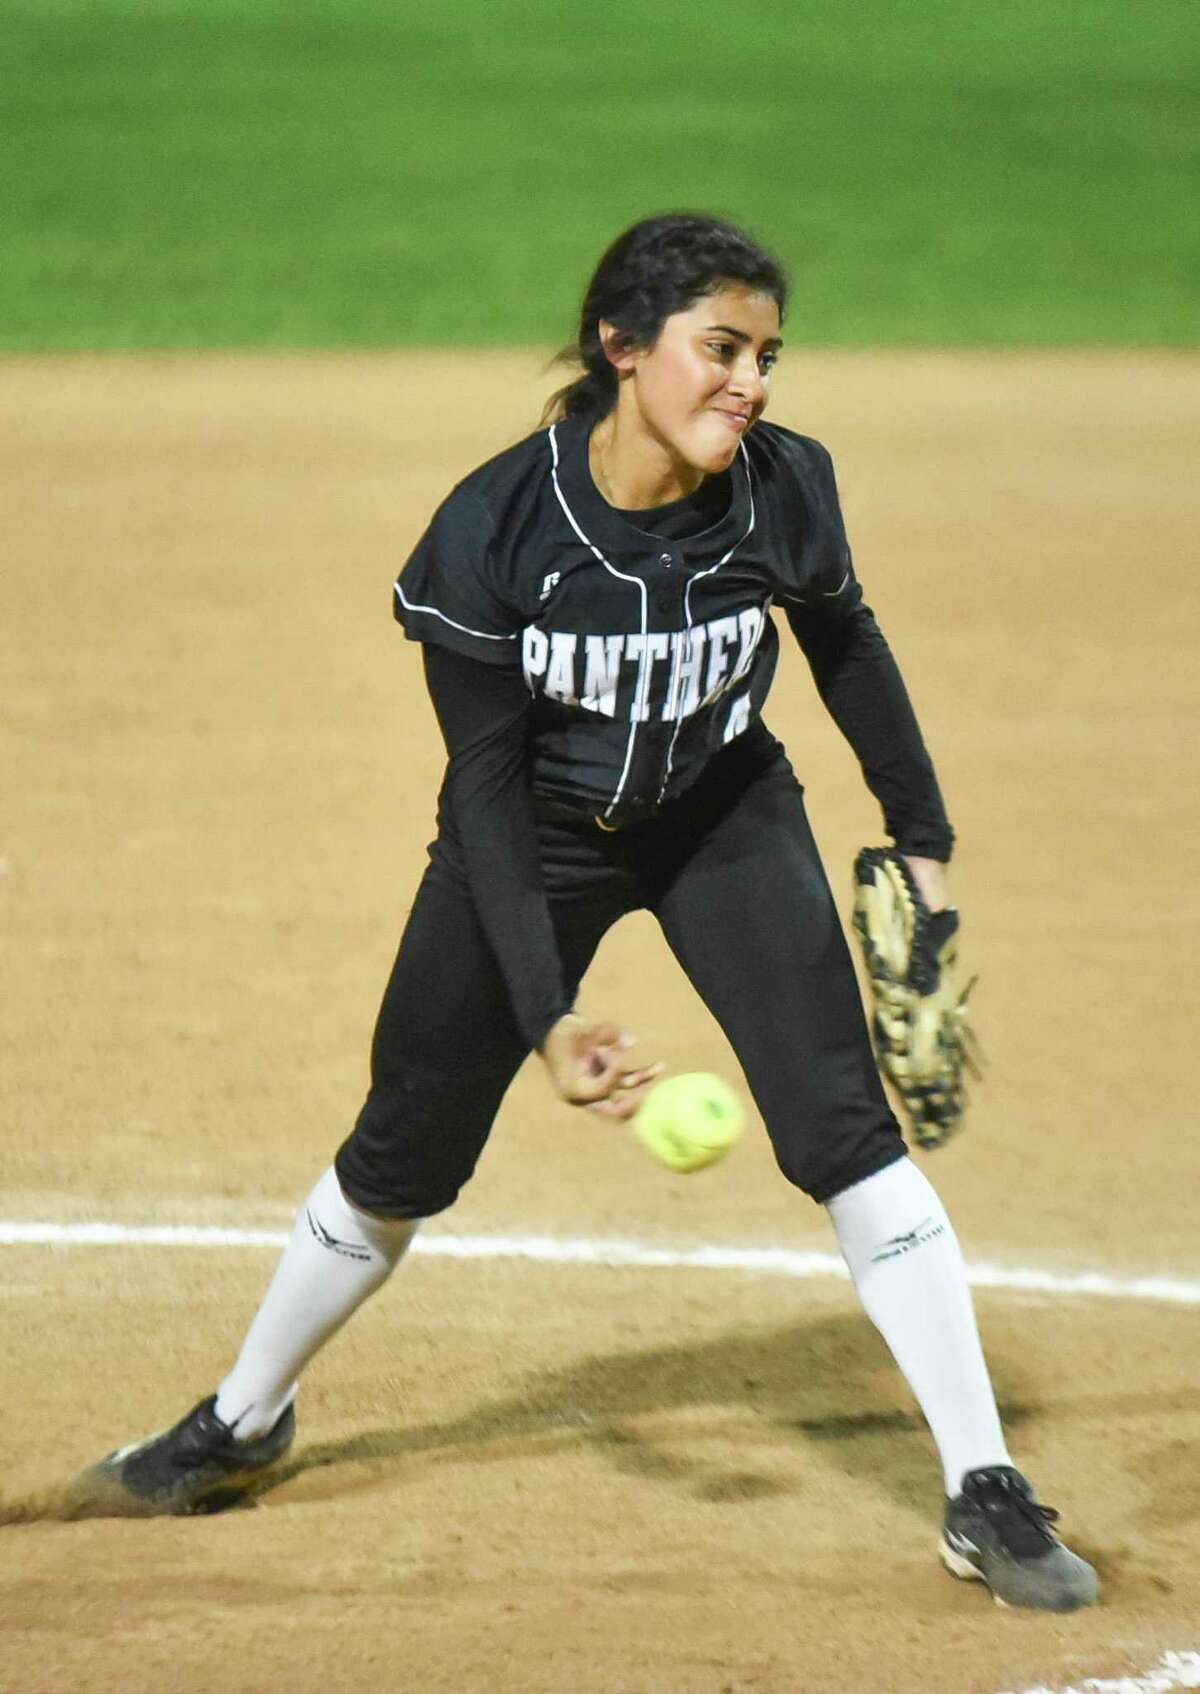 Melinda Beltran and United South nearly picked up their first district win at Del Rio Tuesday night, but four runs in the final two innings sank the Lady Panthers.